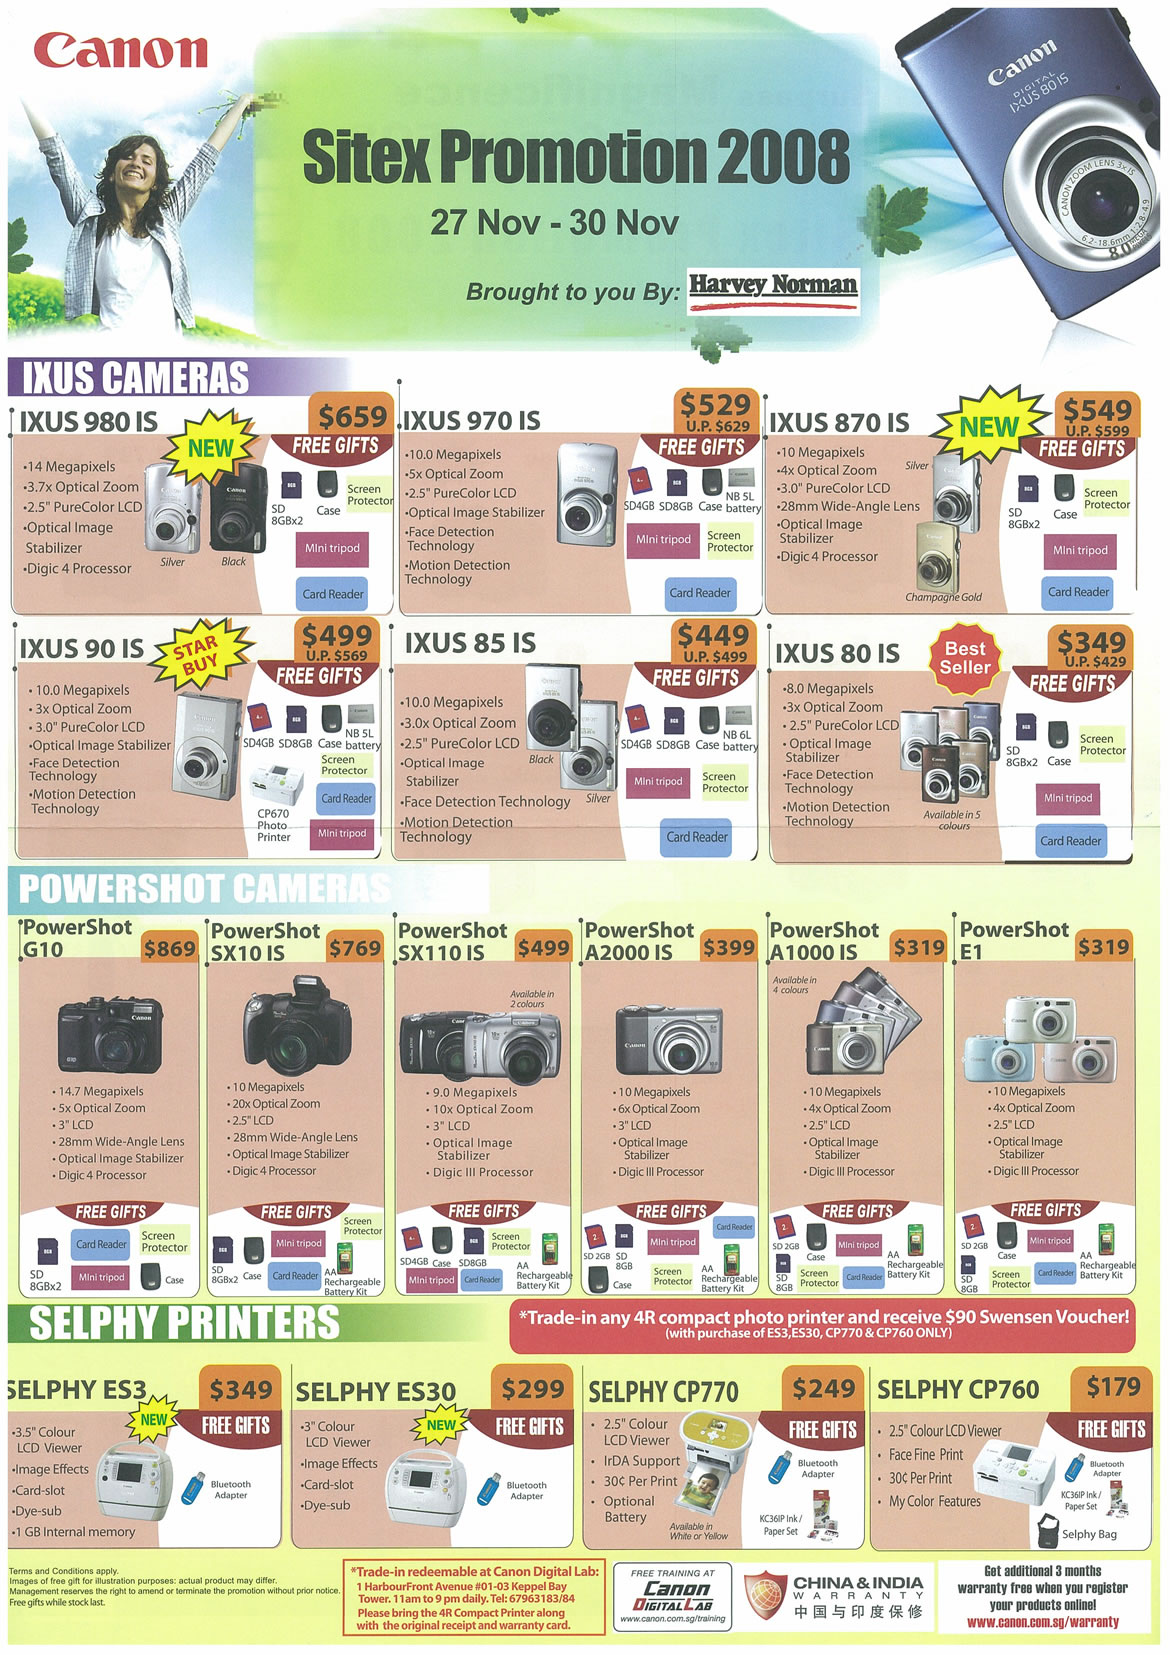 Sitex 2008 price list image brochure of Canon IXUS EOS Cameras Page 1 - Vr-zone Tclong